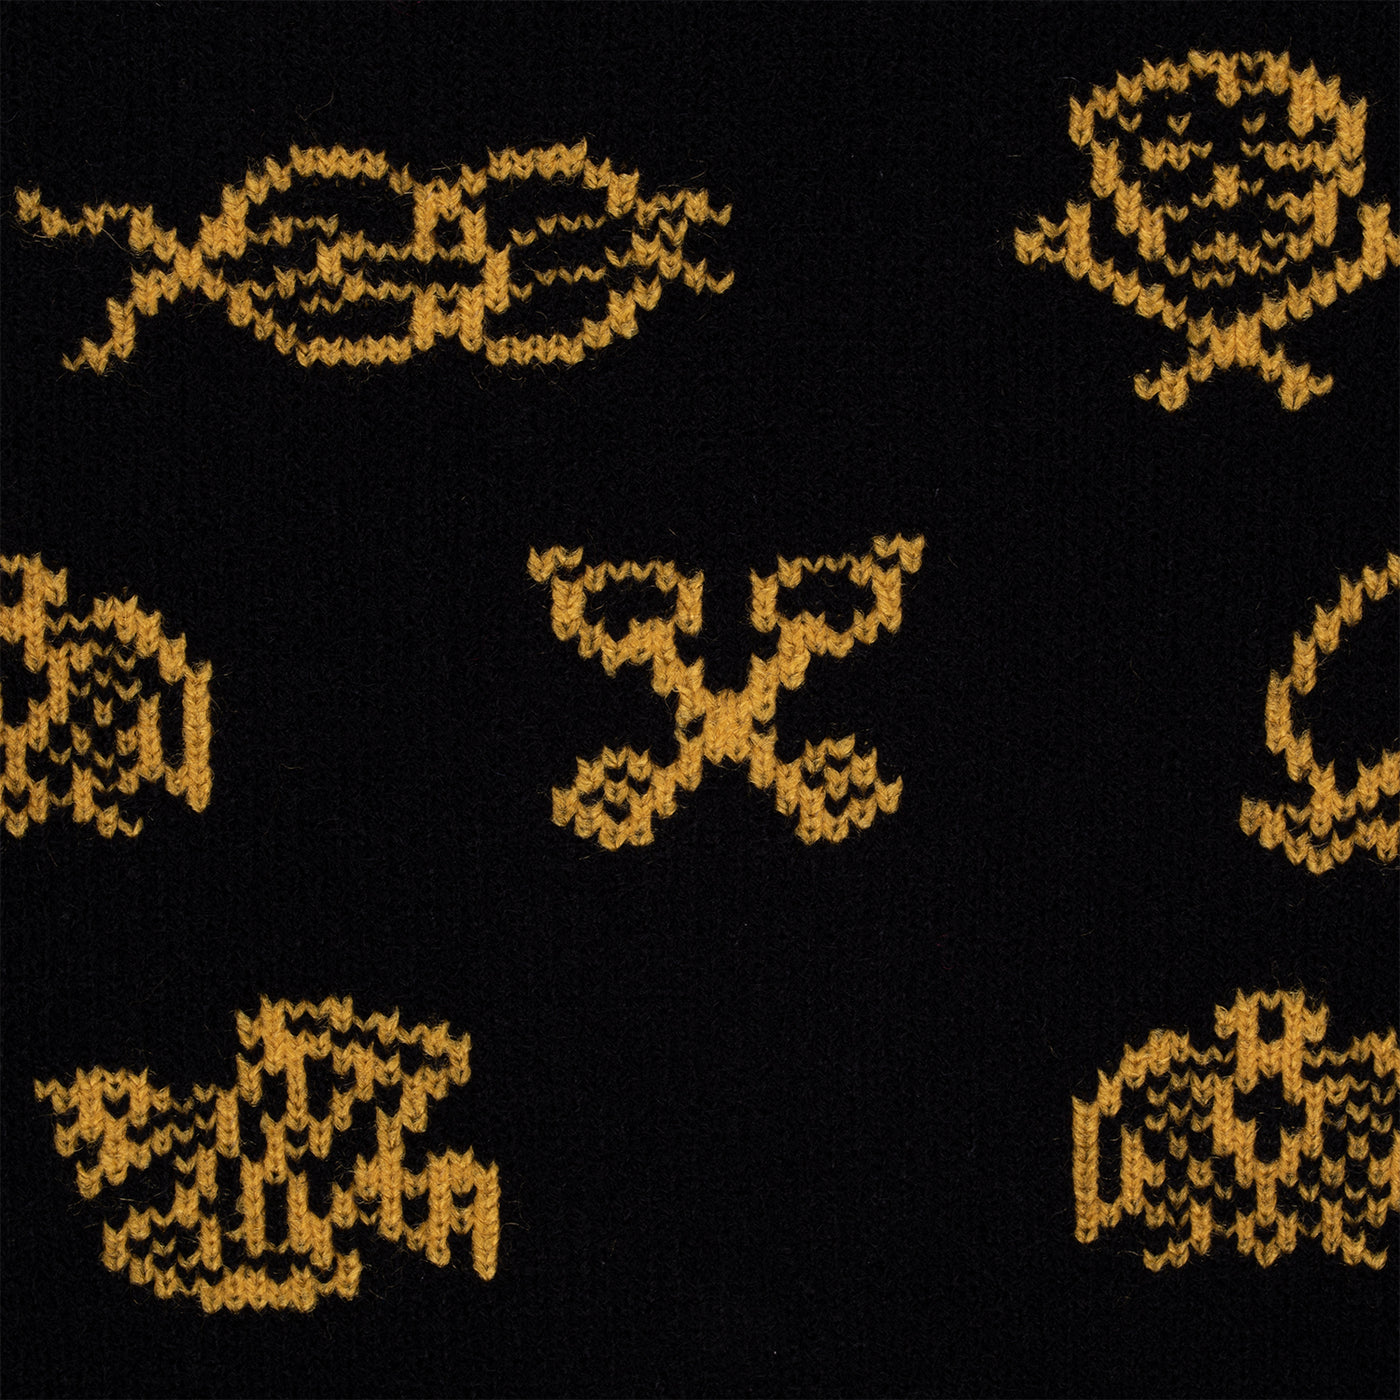 SP Icon Scarf